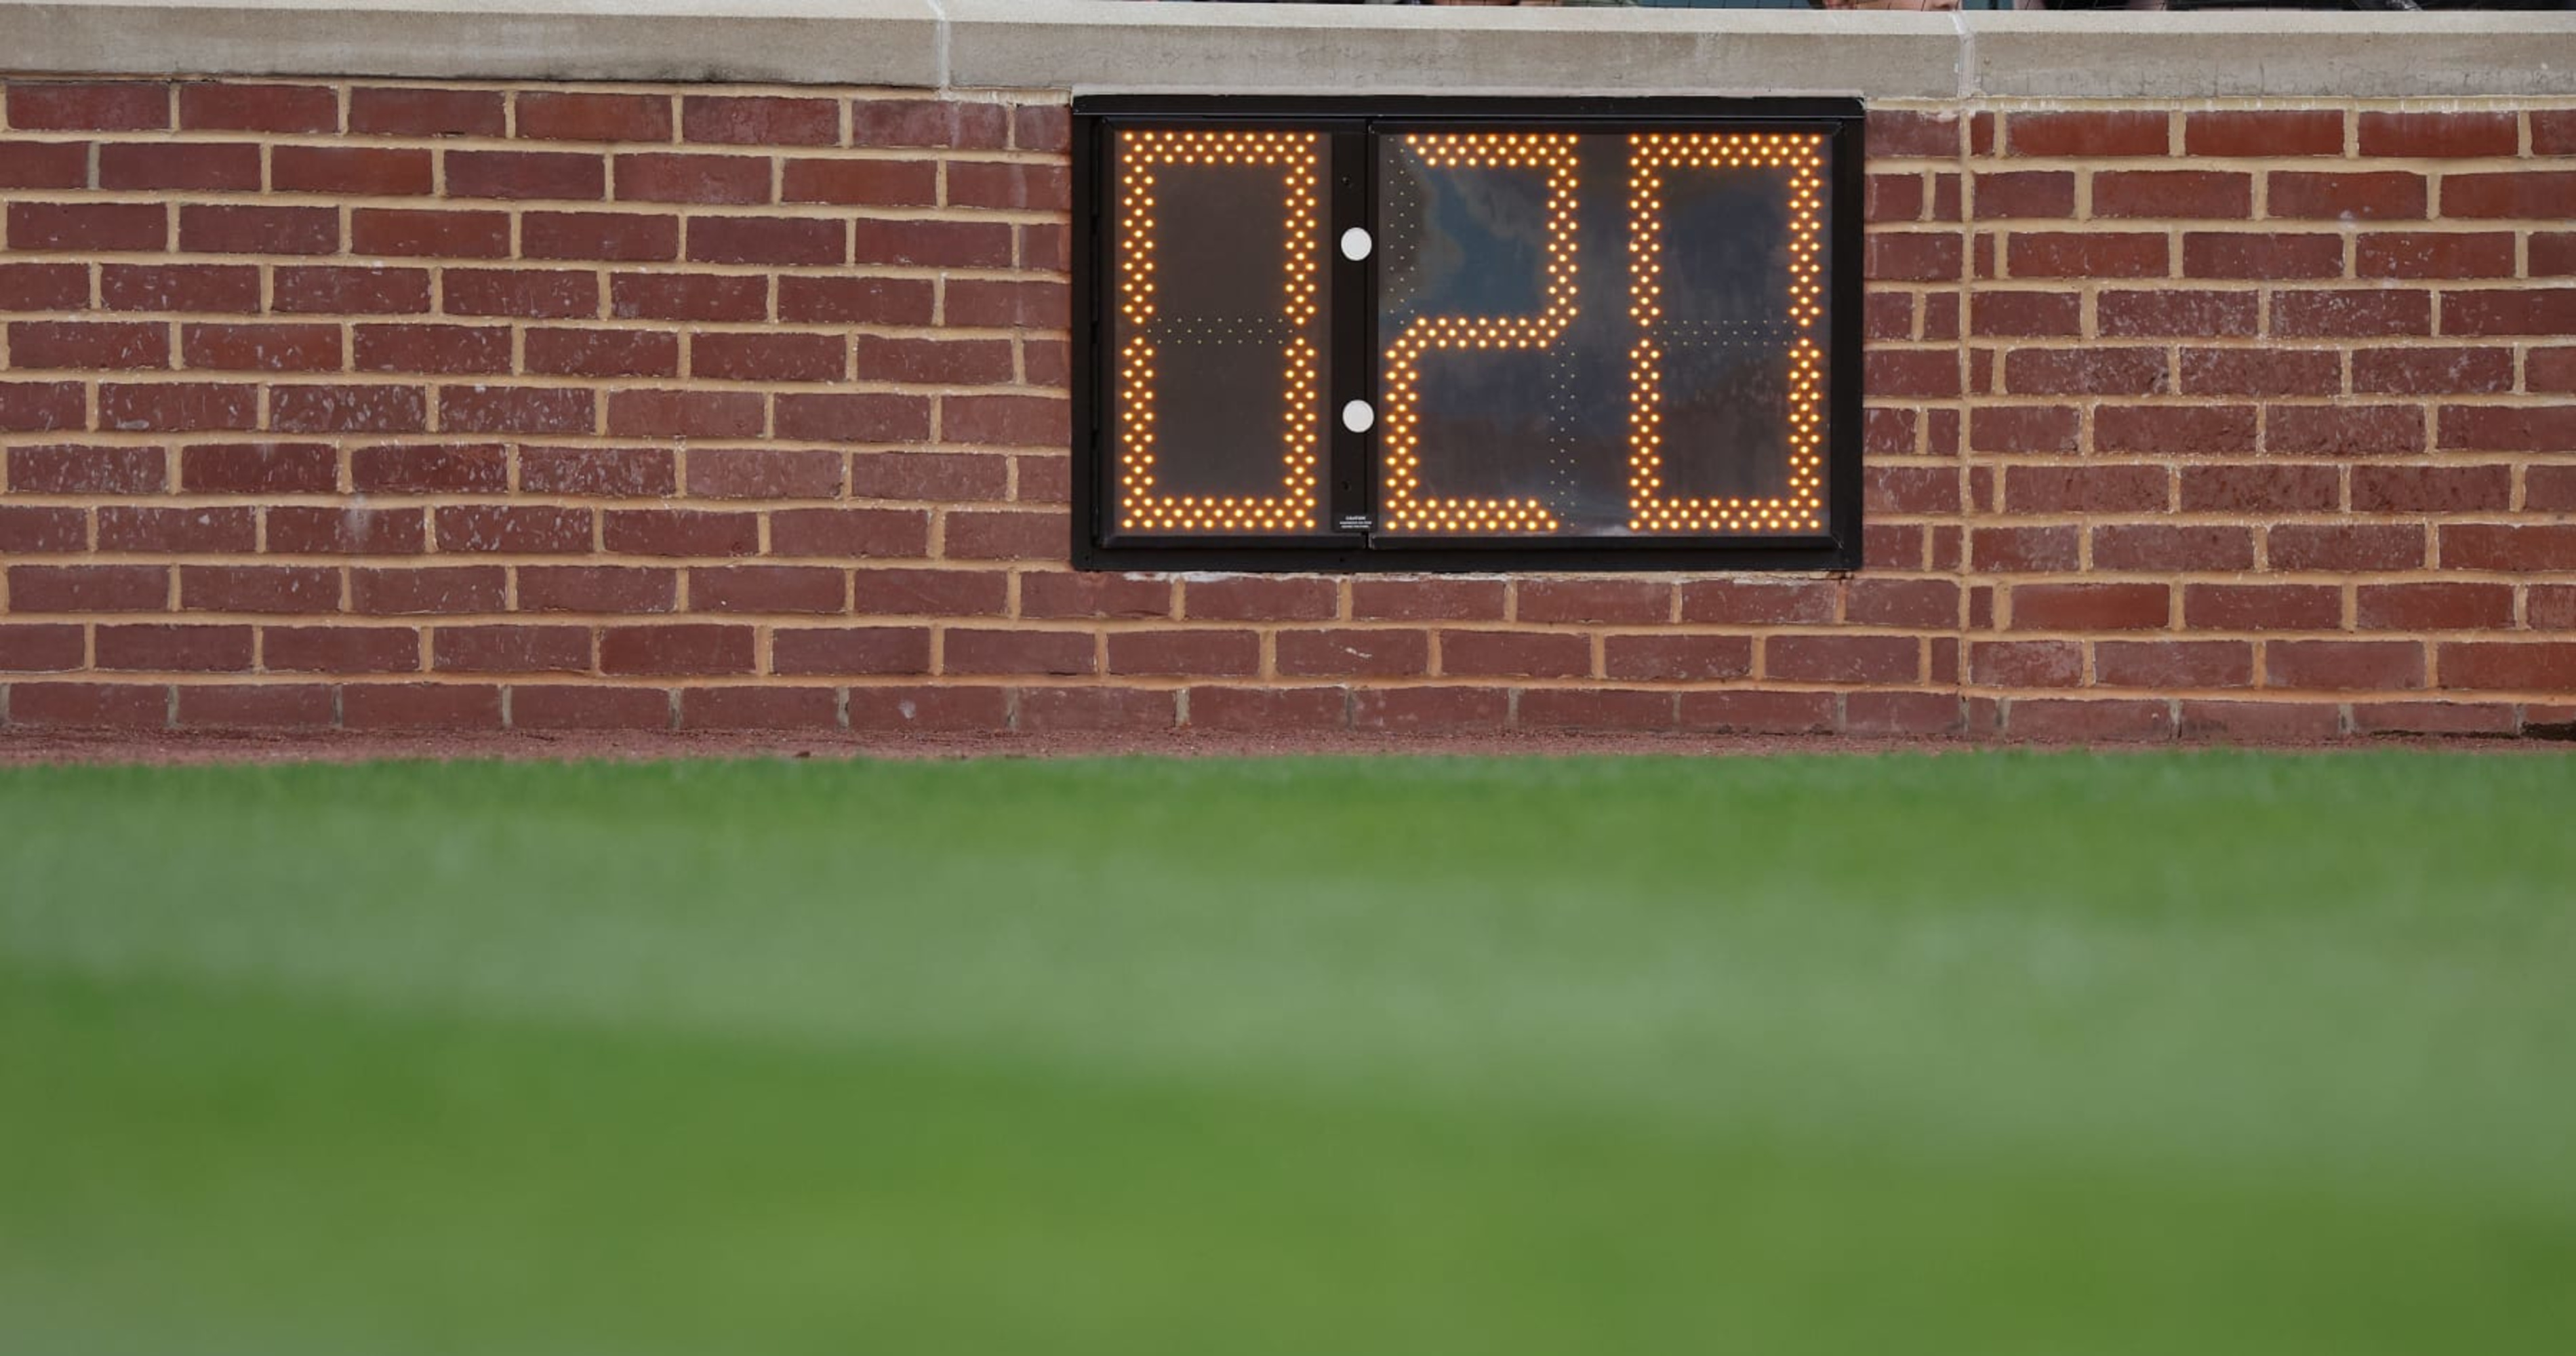 MLB reportedly offers to postpone pitch clock until 2022 – The Denver Post